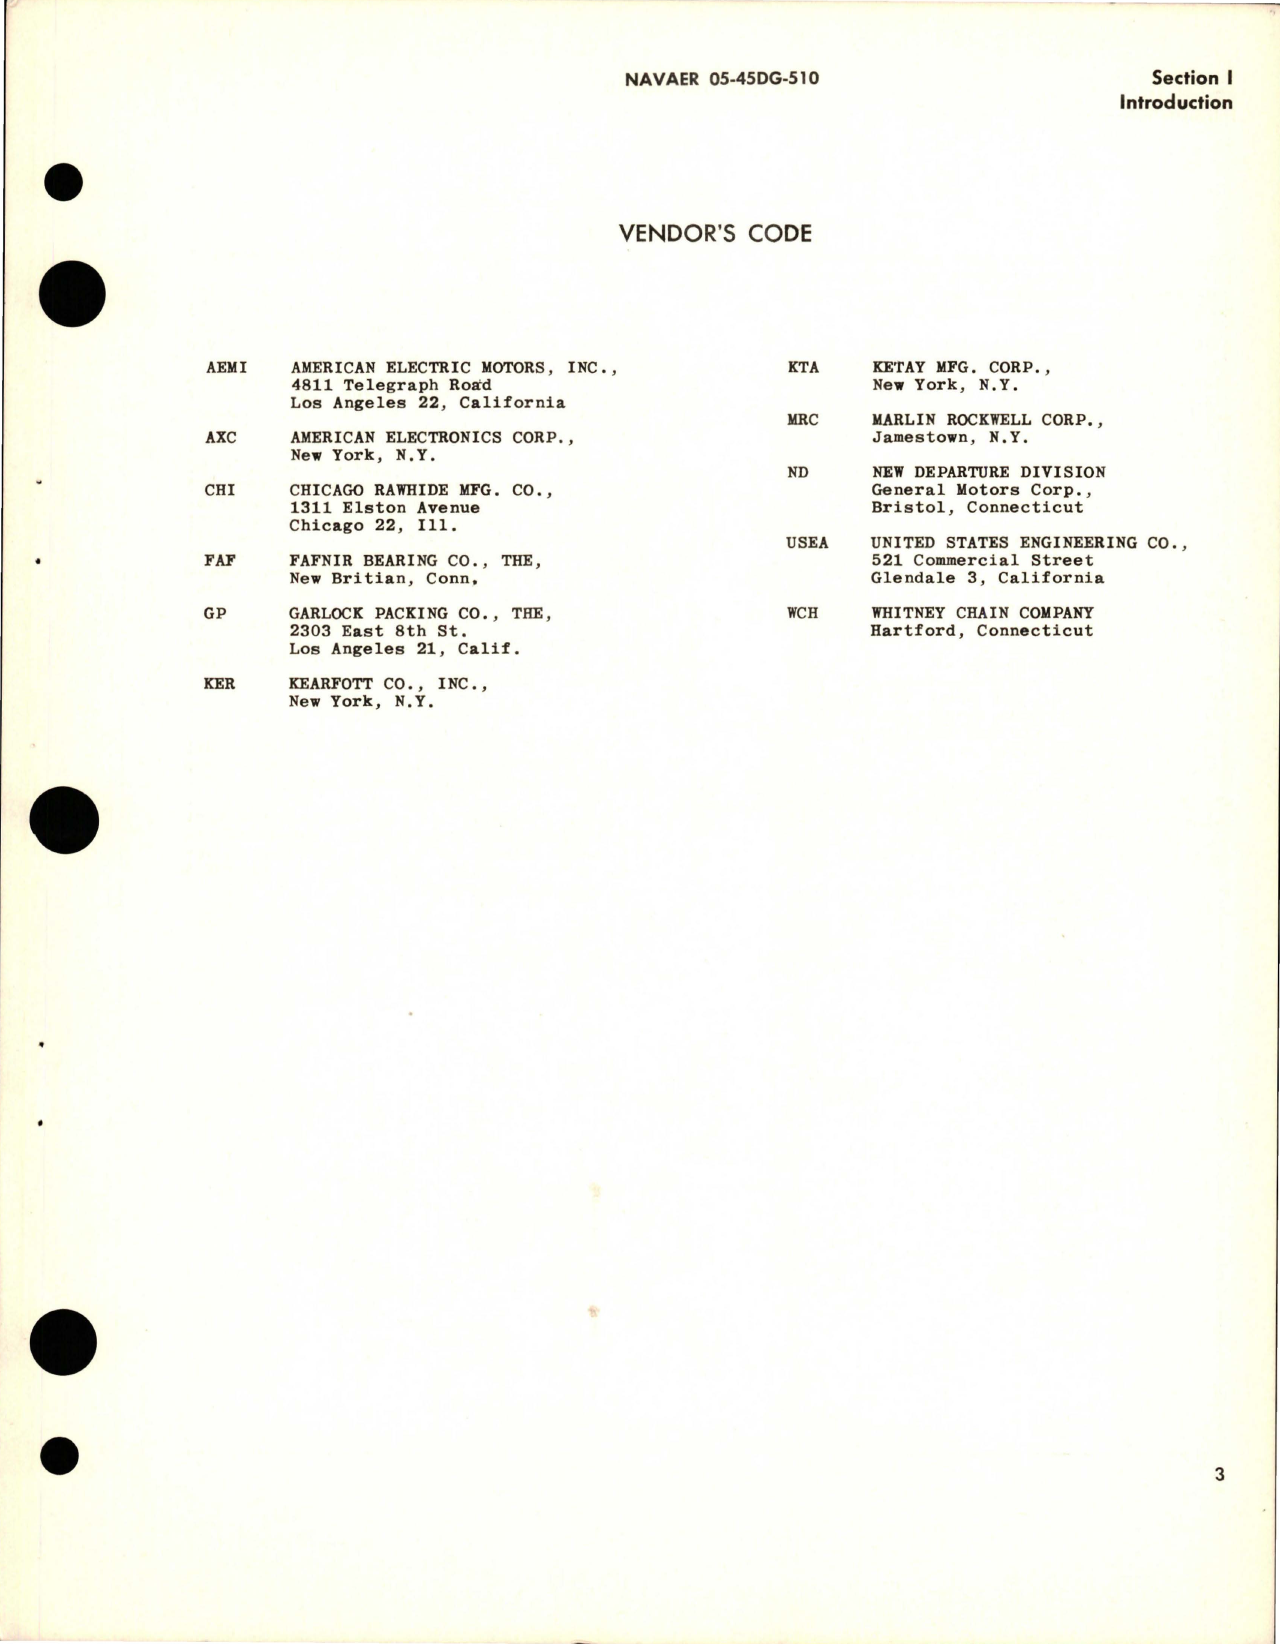 Sample page 5 from AirCorps Library document: Illustrated Parts Breakdown for Servo Mechanism Assembly